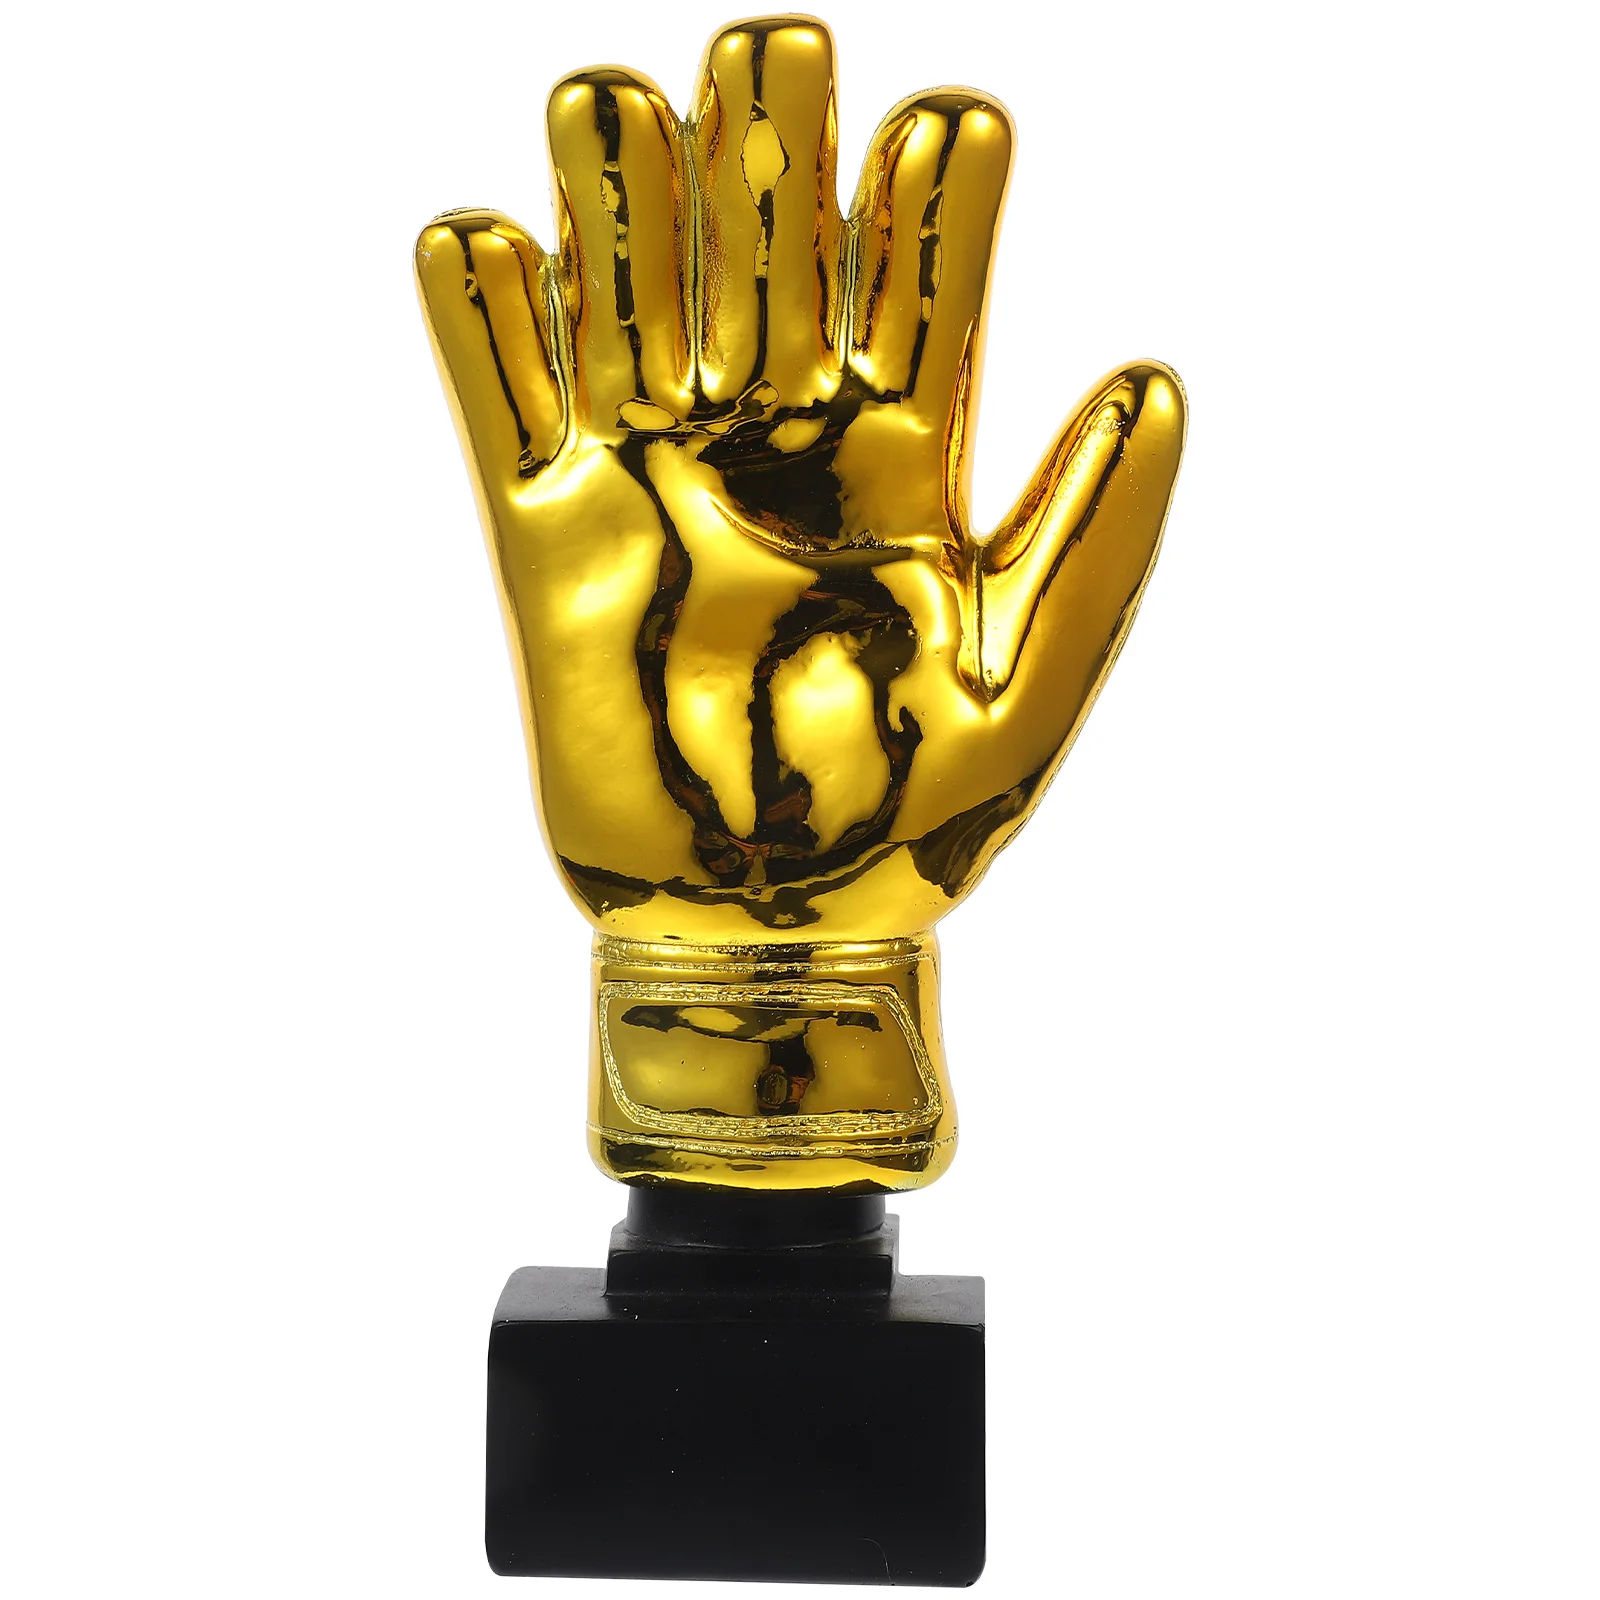 

Award Trophy Football Match Glove Trophy Goalkeeper Souvenir Home Decoration Soccer Fans Gifts Collections Trophies